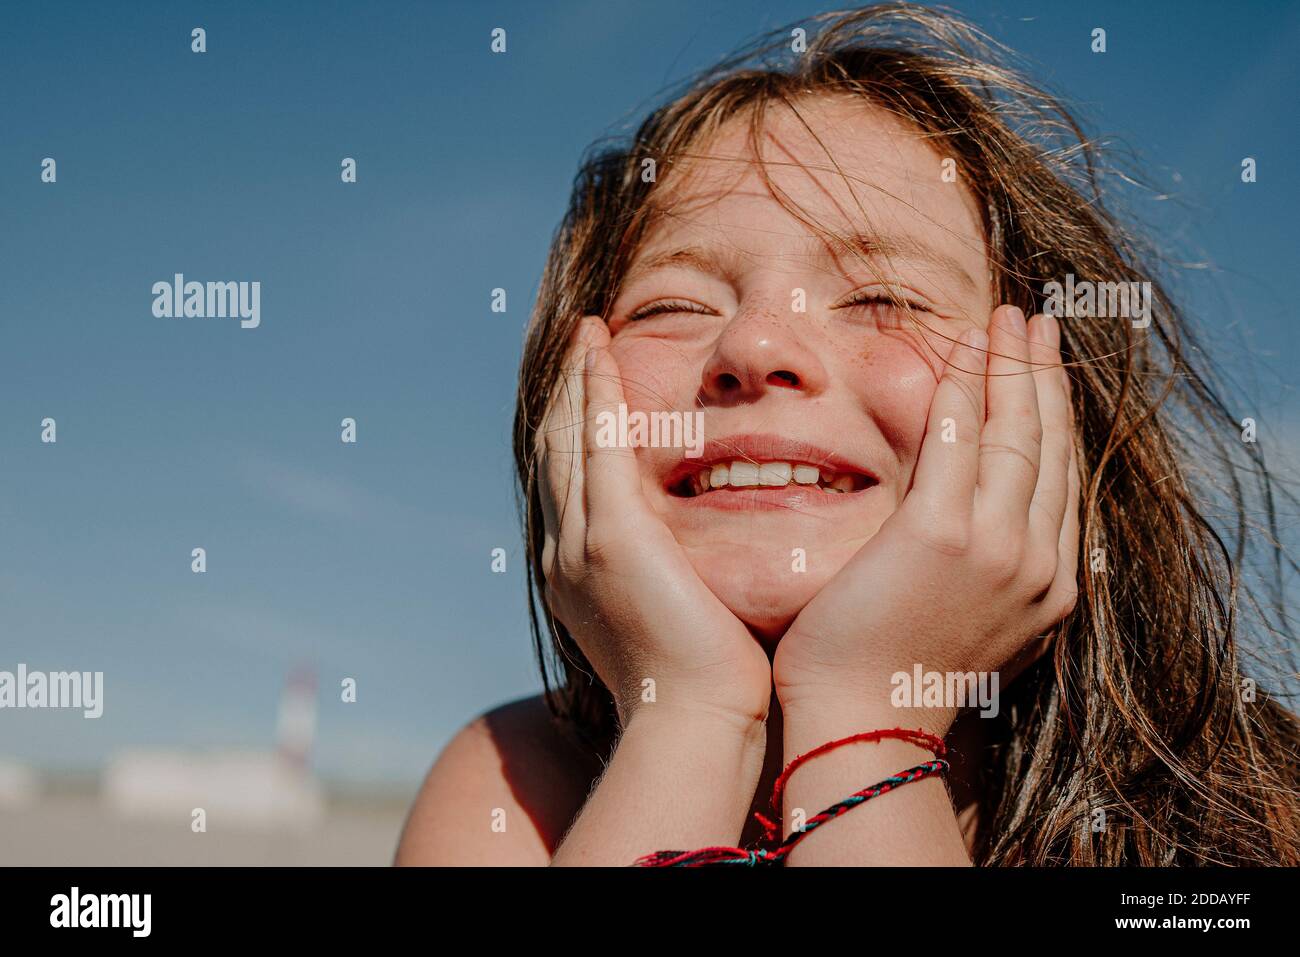 Girl with hand on chin during sunny day Stock Photo